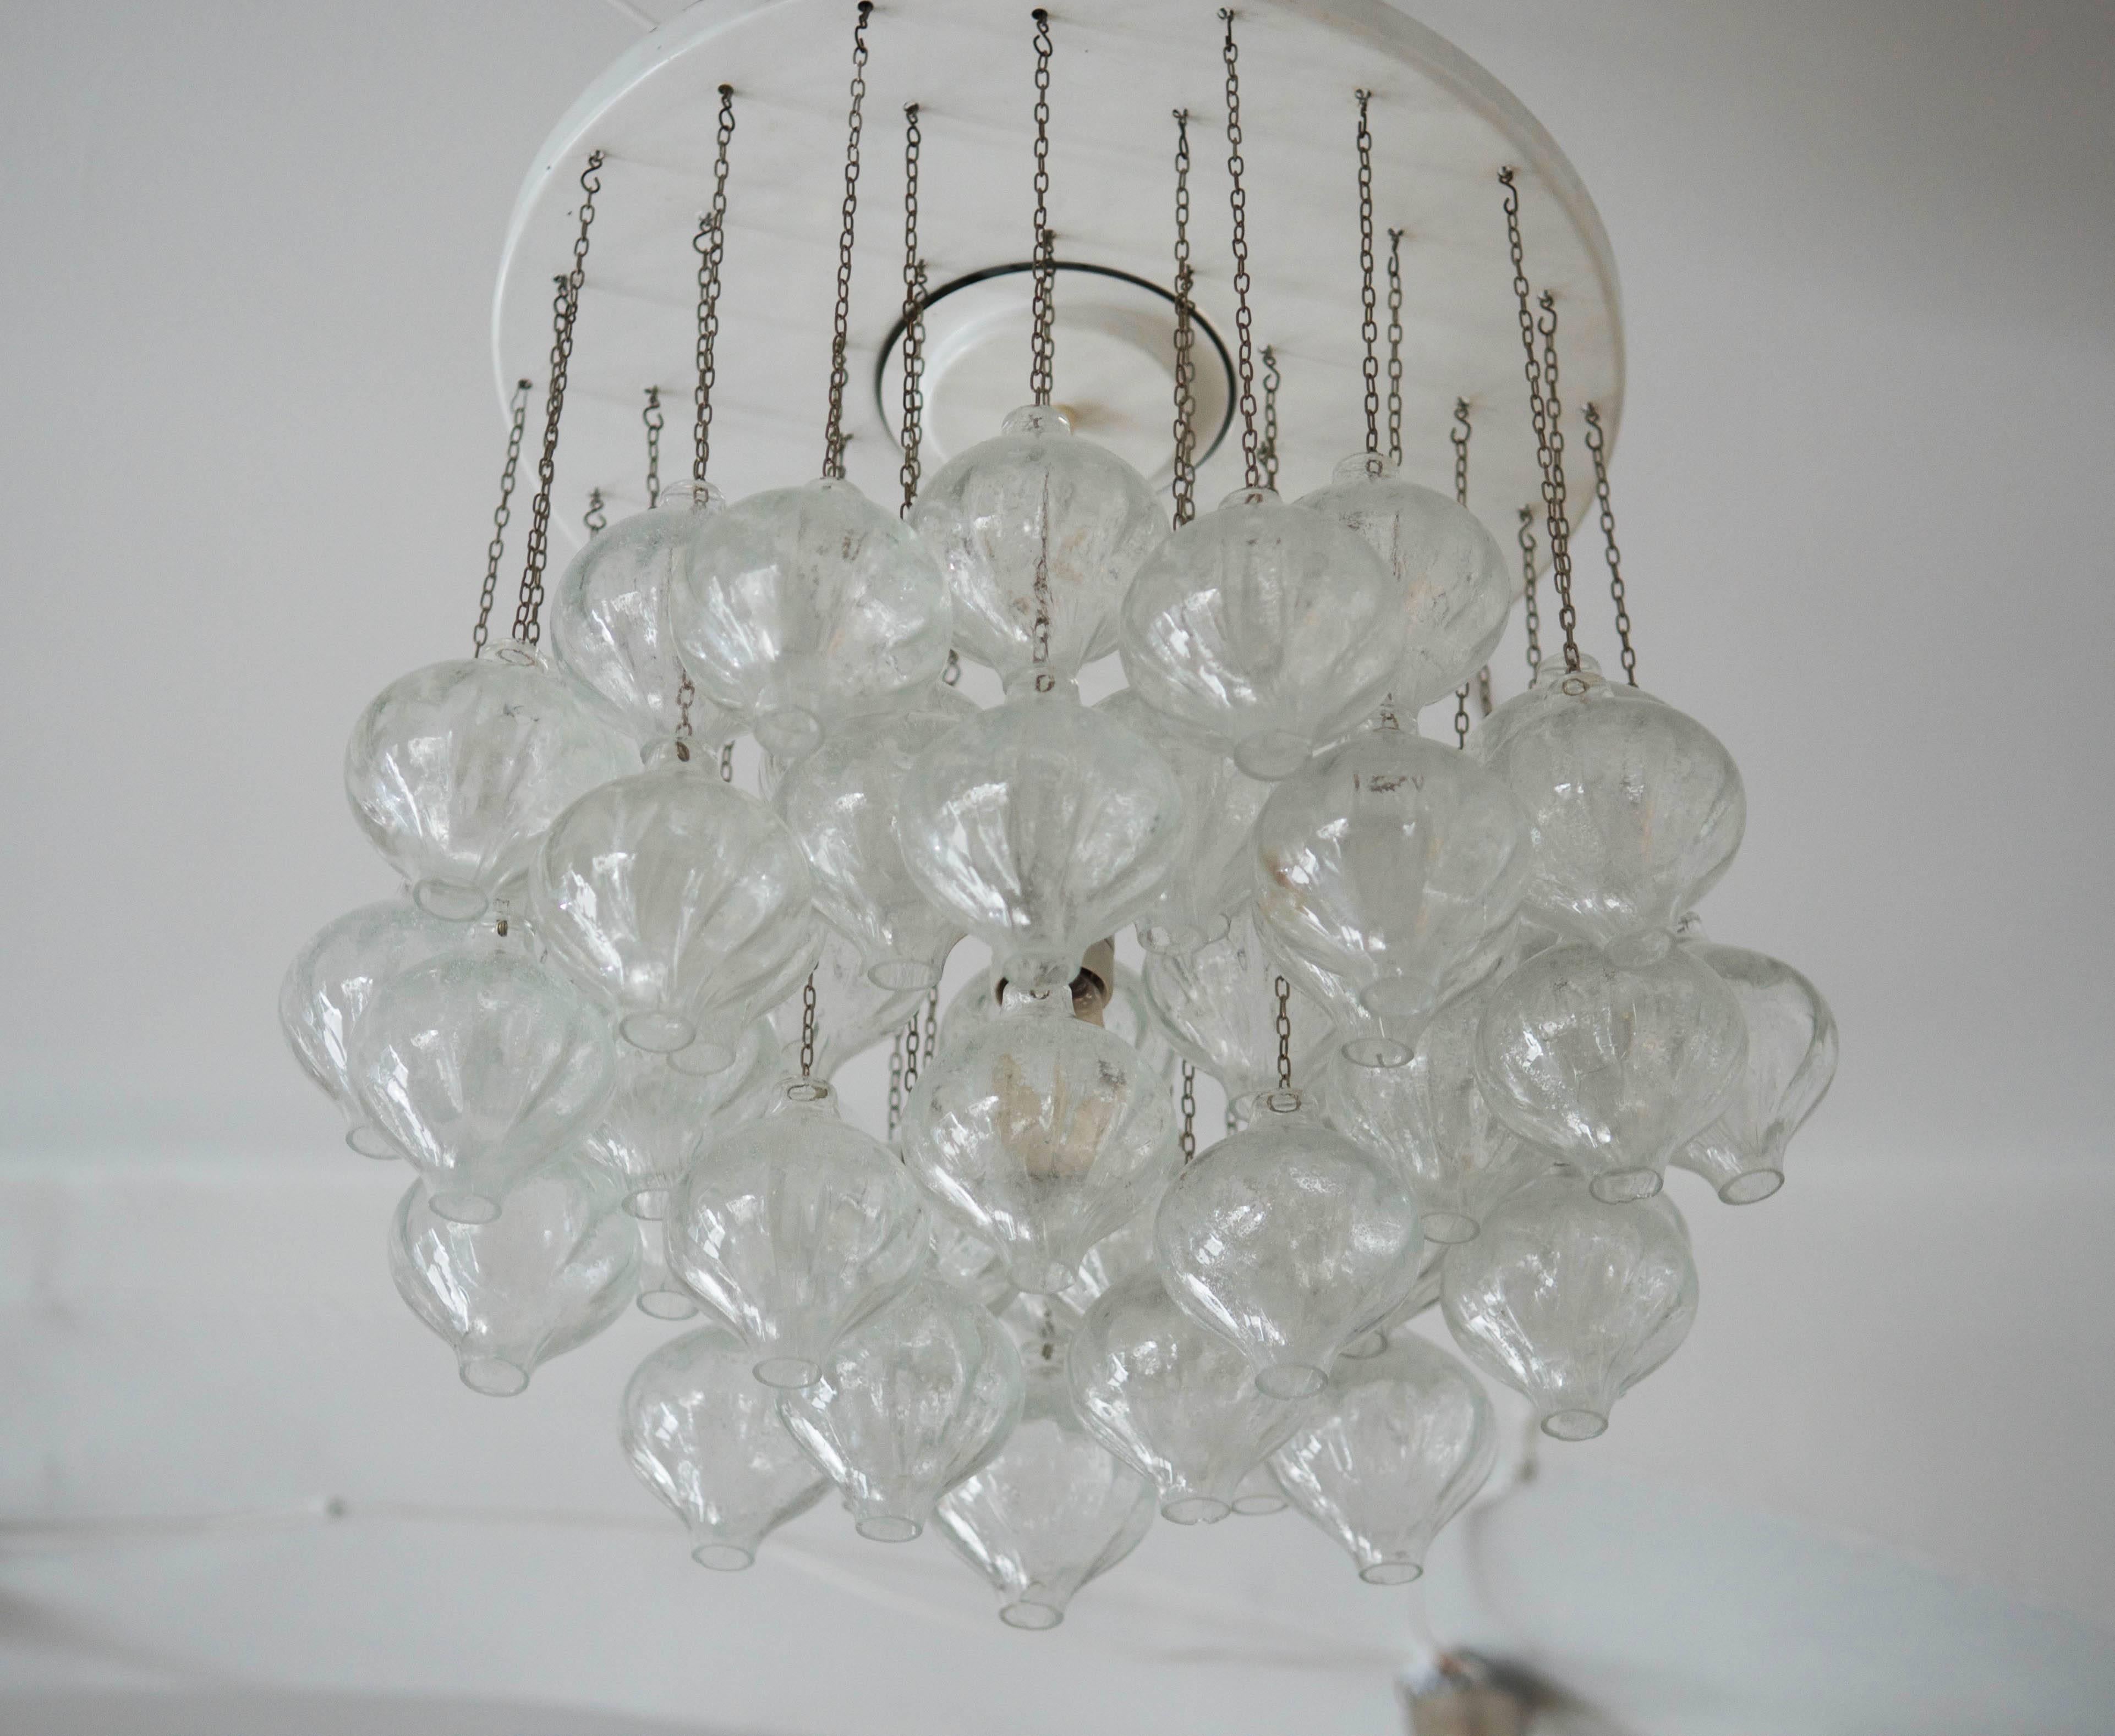 Chandelier fitted with one E27 bulb and 50 handblown glass elements made by J.T. Kalmar.
Excellent condition with minimal signs of age. The glass bulbs have no damage.
The total length is now about 60cm (23.62